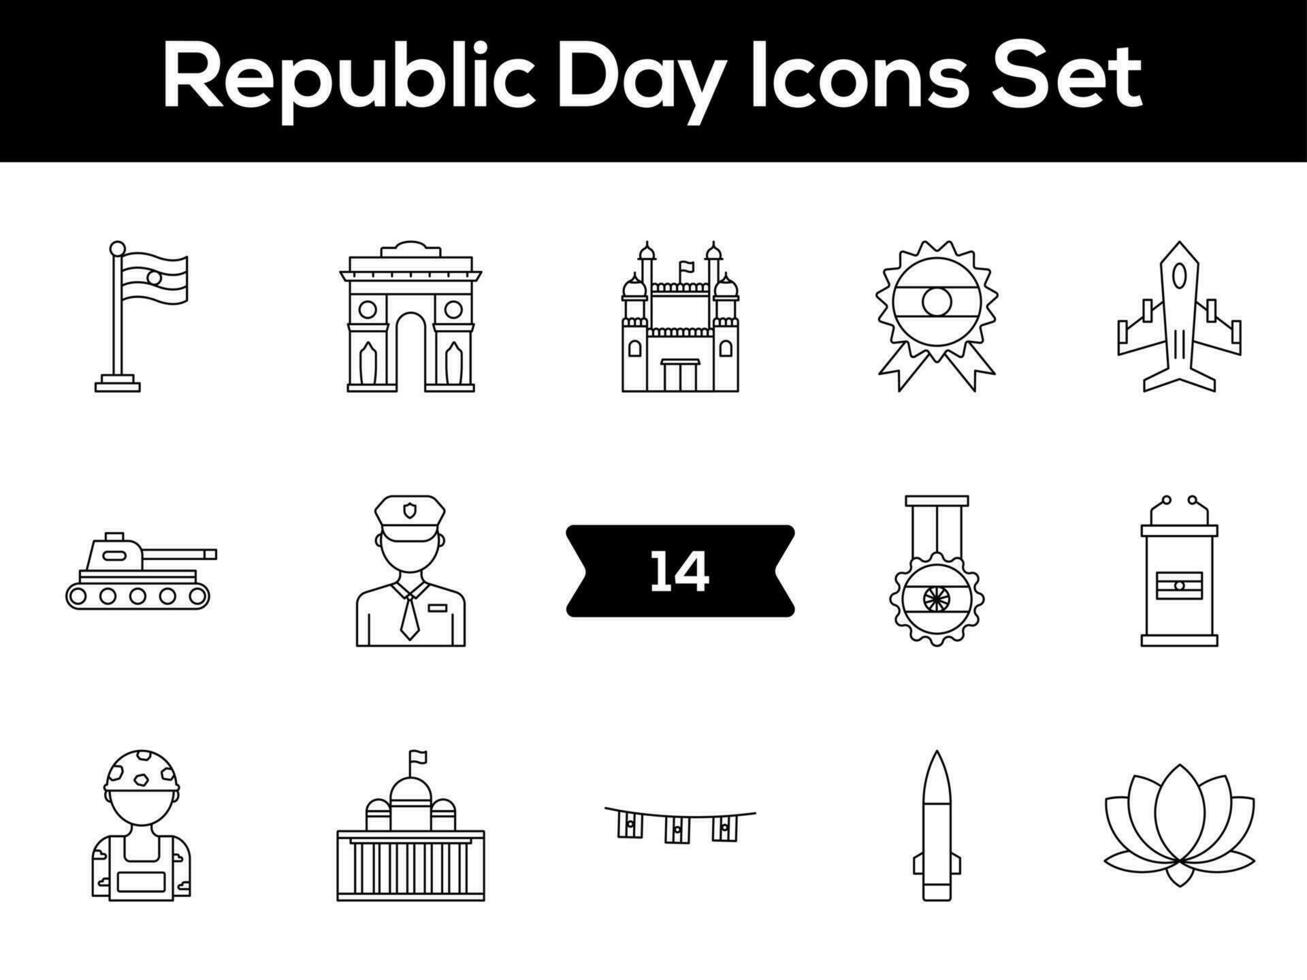 Black Line Art Set of Republic Day Icon In Flat Style. vector